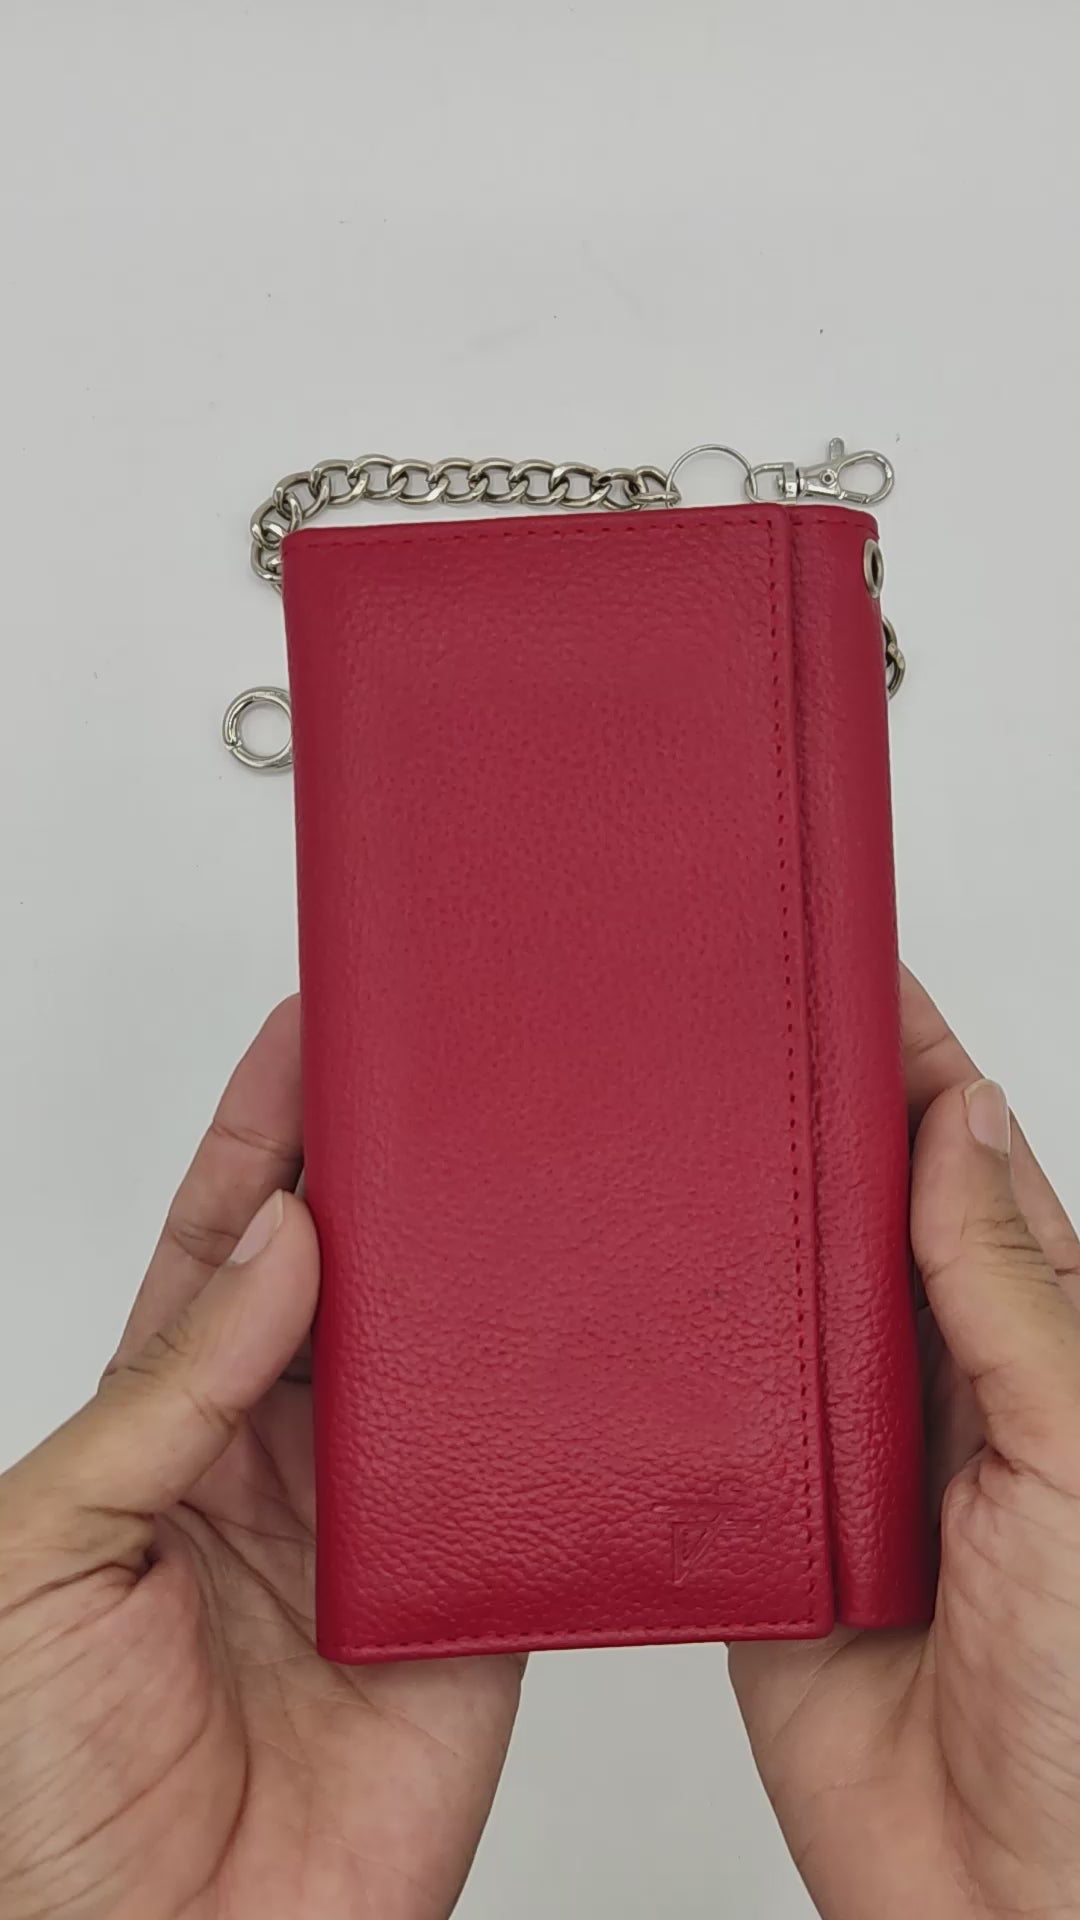 Men's RFID Blocking Tri-fold Long Style Red Chain Wallet with Snap Clo